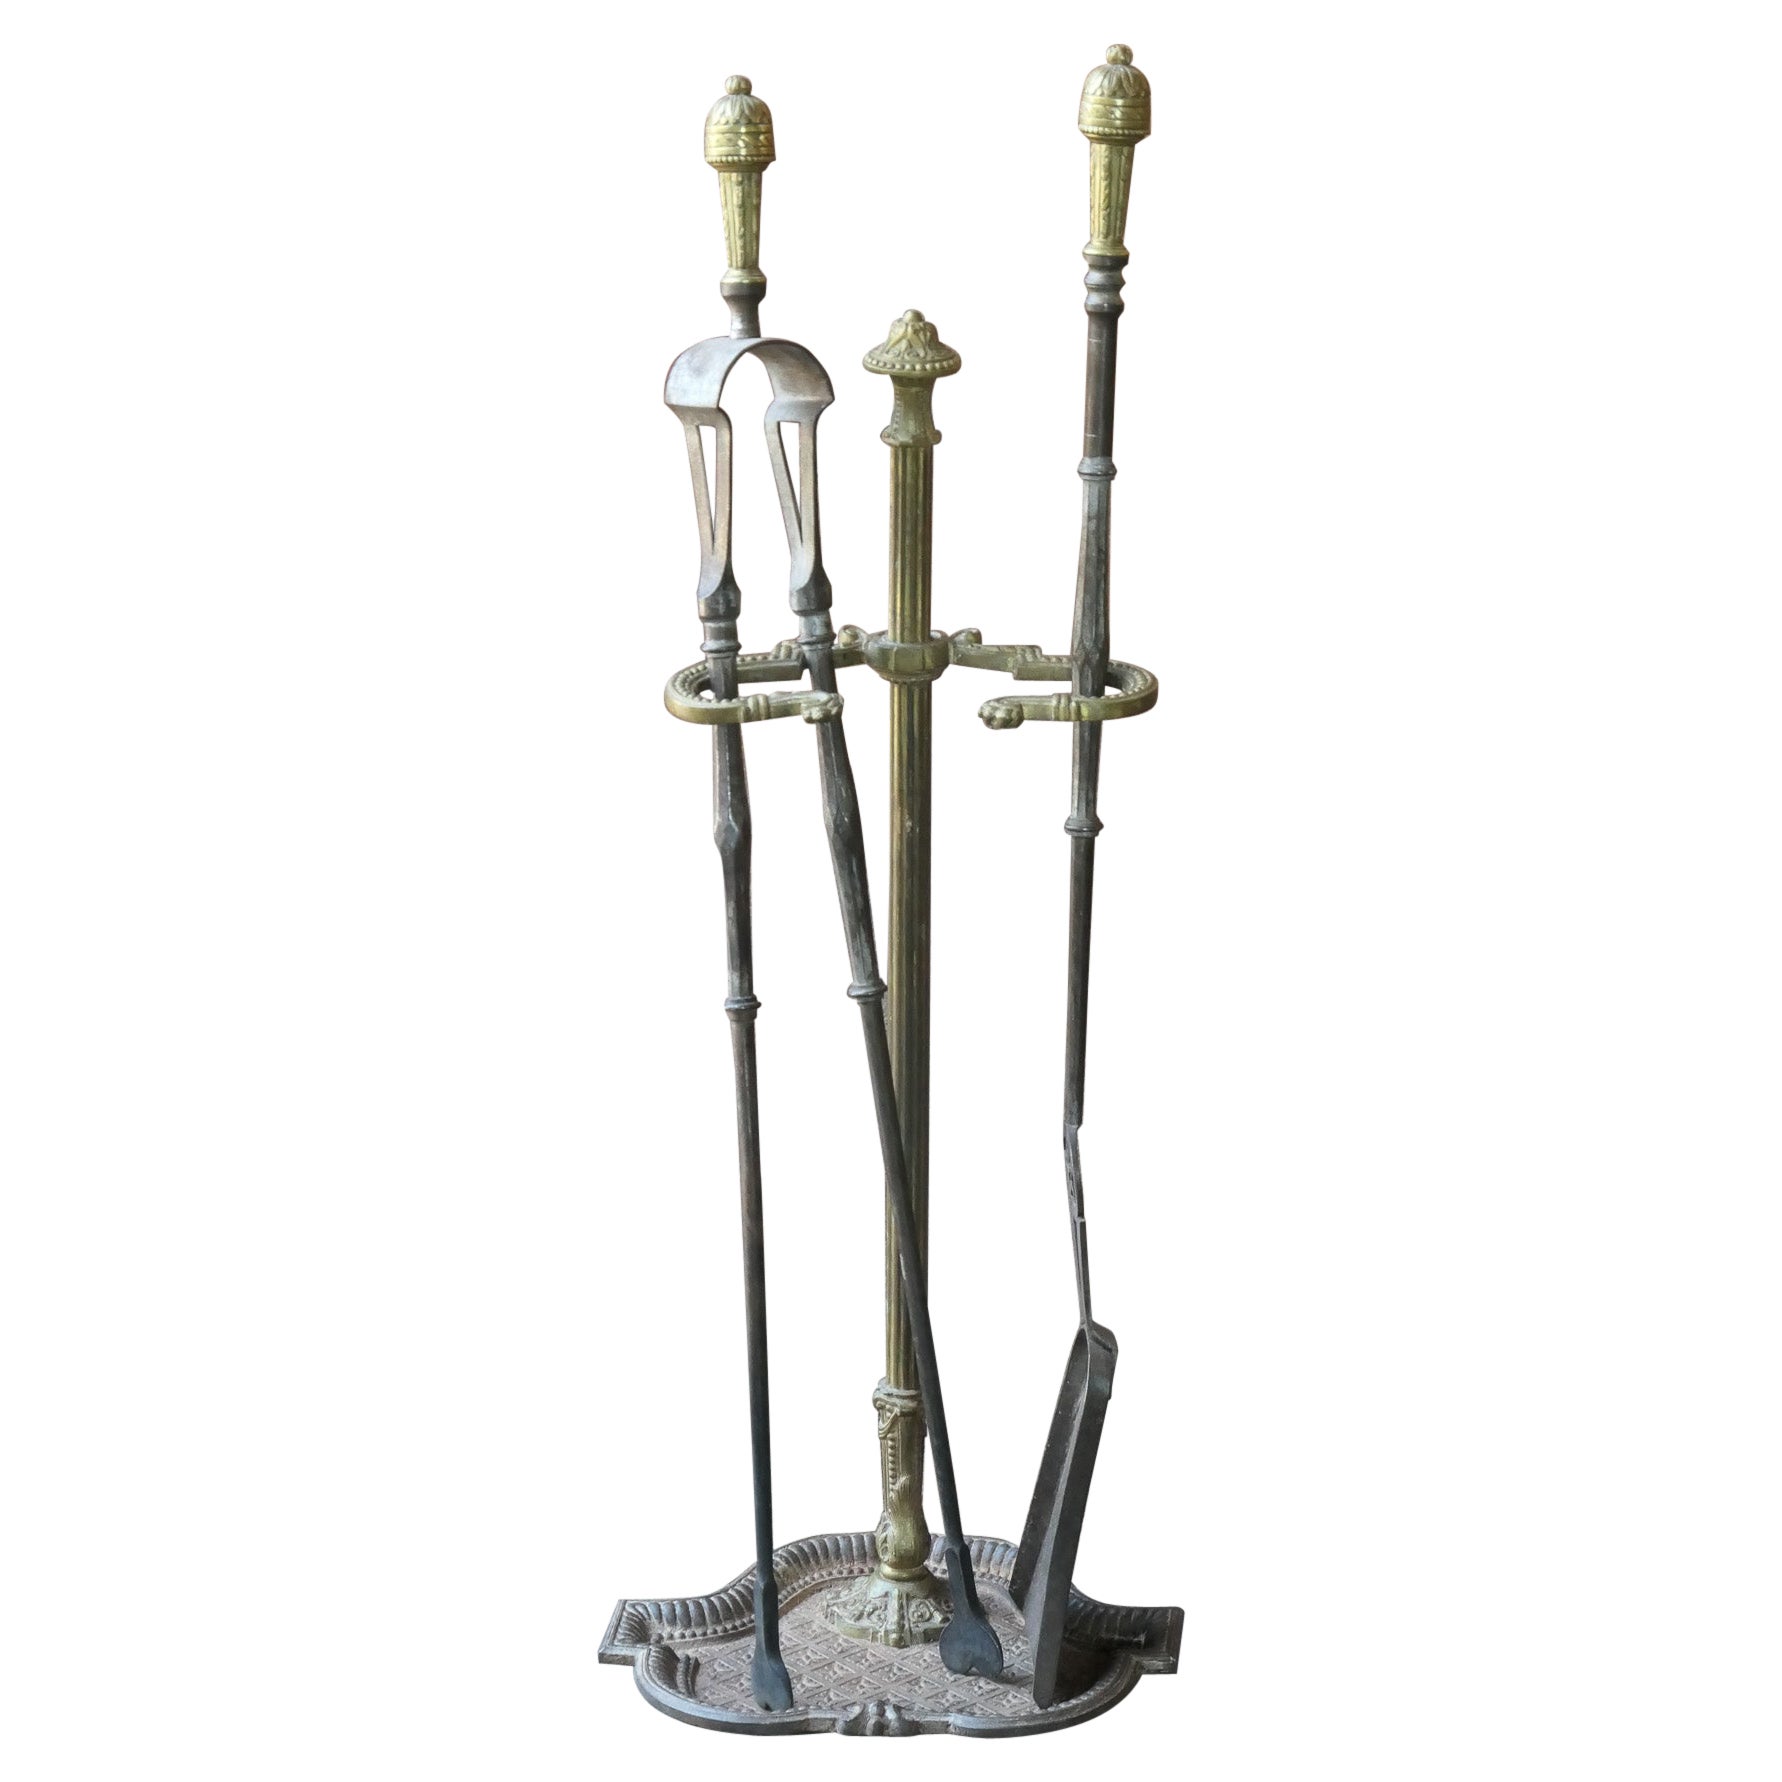 Large 18th - 19th C. French Neoclassical Fireplace Poker Set For Sale